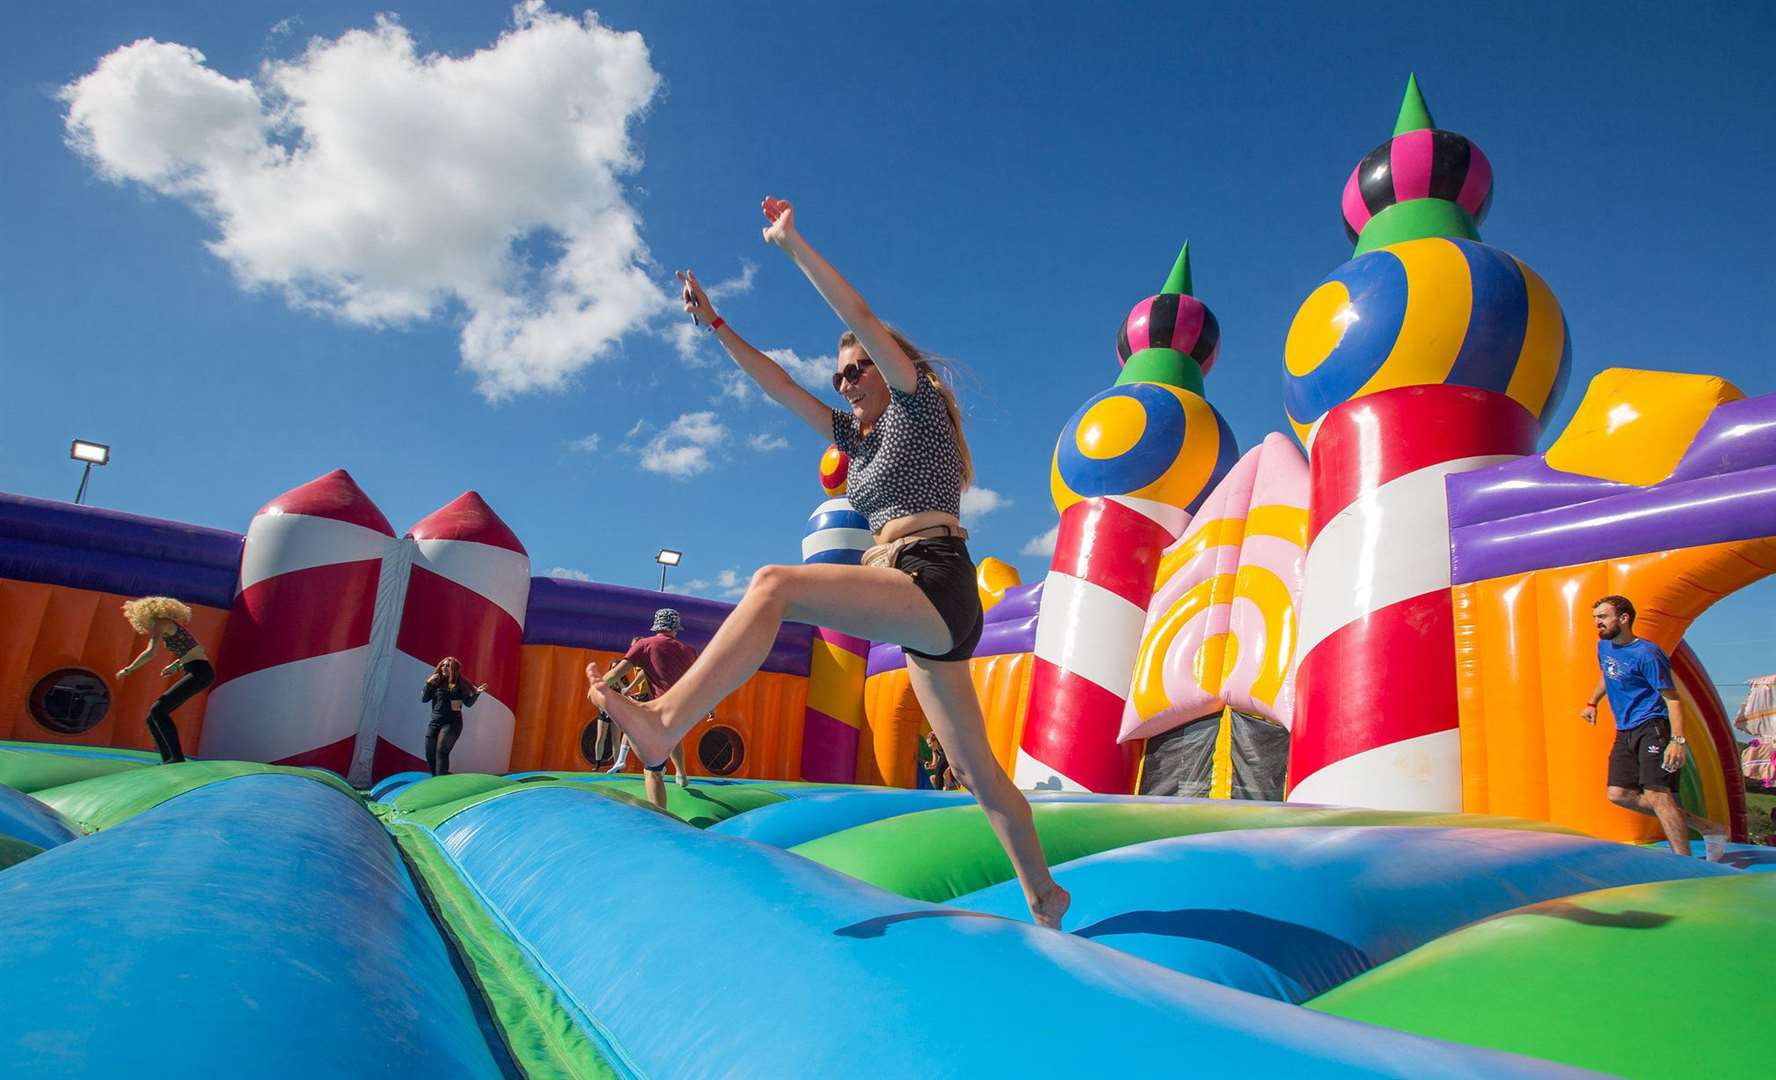 You can bounce on the world's biggest bouncy castle at Dreamland this Easter holidays